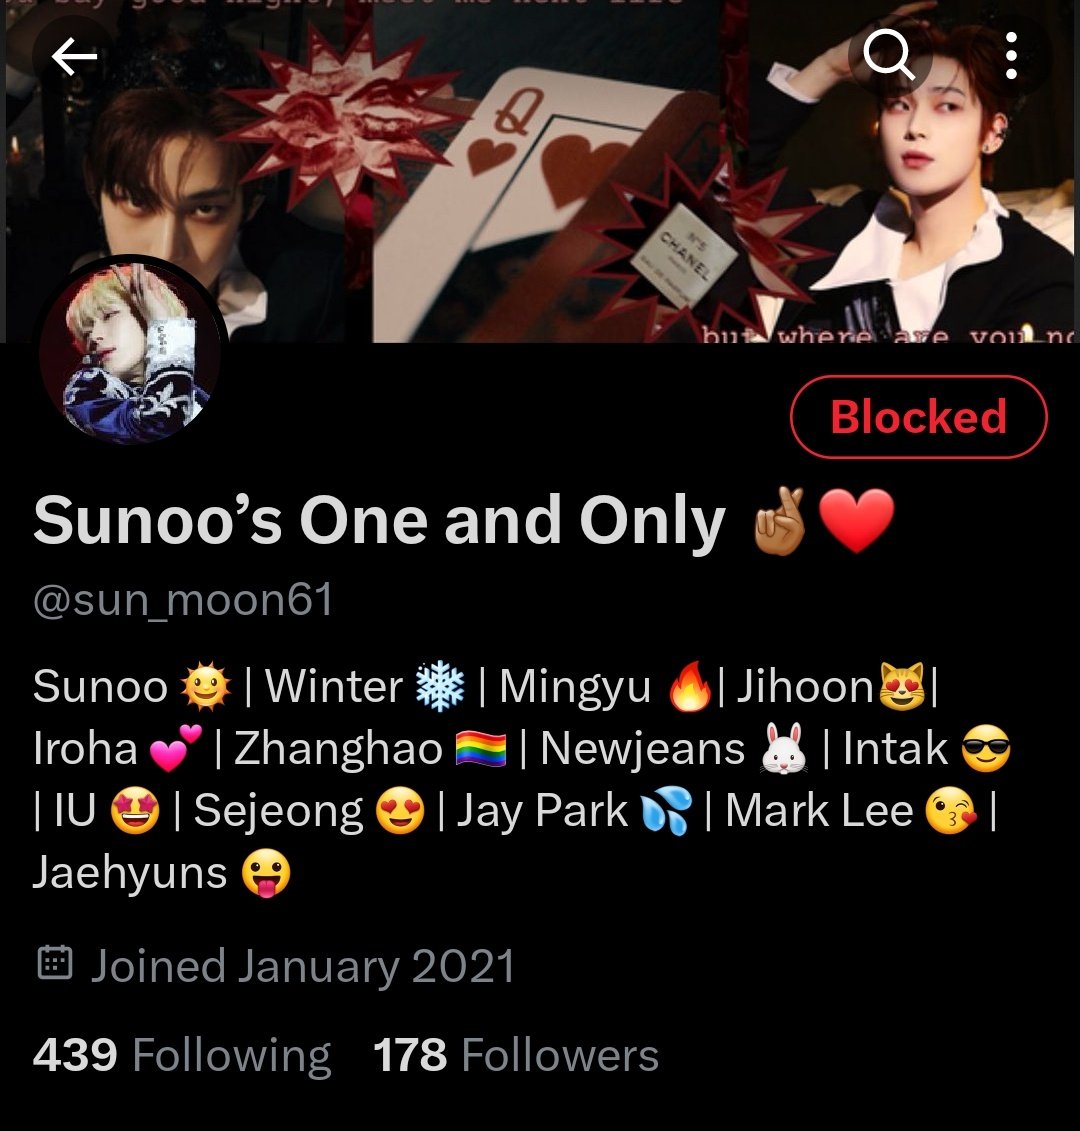 URGENT REPORT 📢 This acc is constantly target h@rassing and spreading hat1 towards 🐆 for a while. REPORT IMMEDIATELY BOTH ACC AND ALL MAL1CIOUS TWEETS ‼️ ACC🔗x.com/sun_moon61 🔗tinyurl.com/5hd8s868 Report under Adπse &h@r@ssment - insu1t - target h@rassment